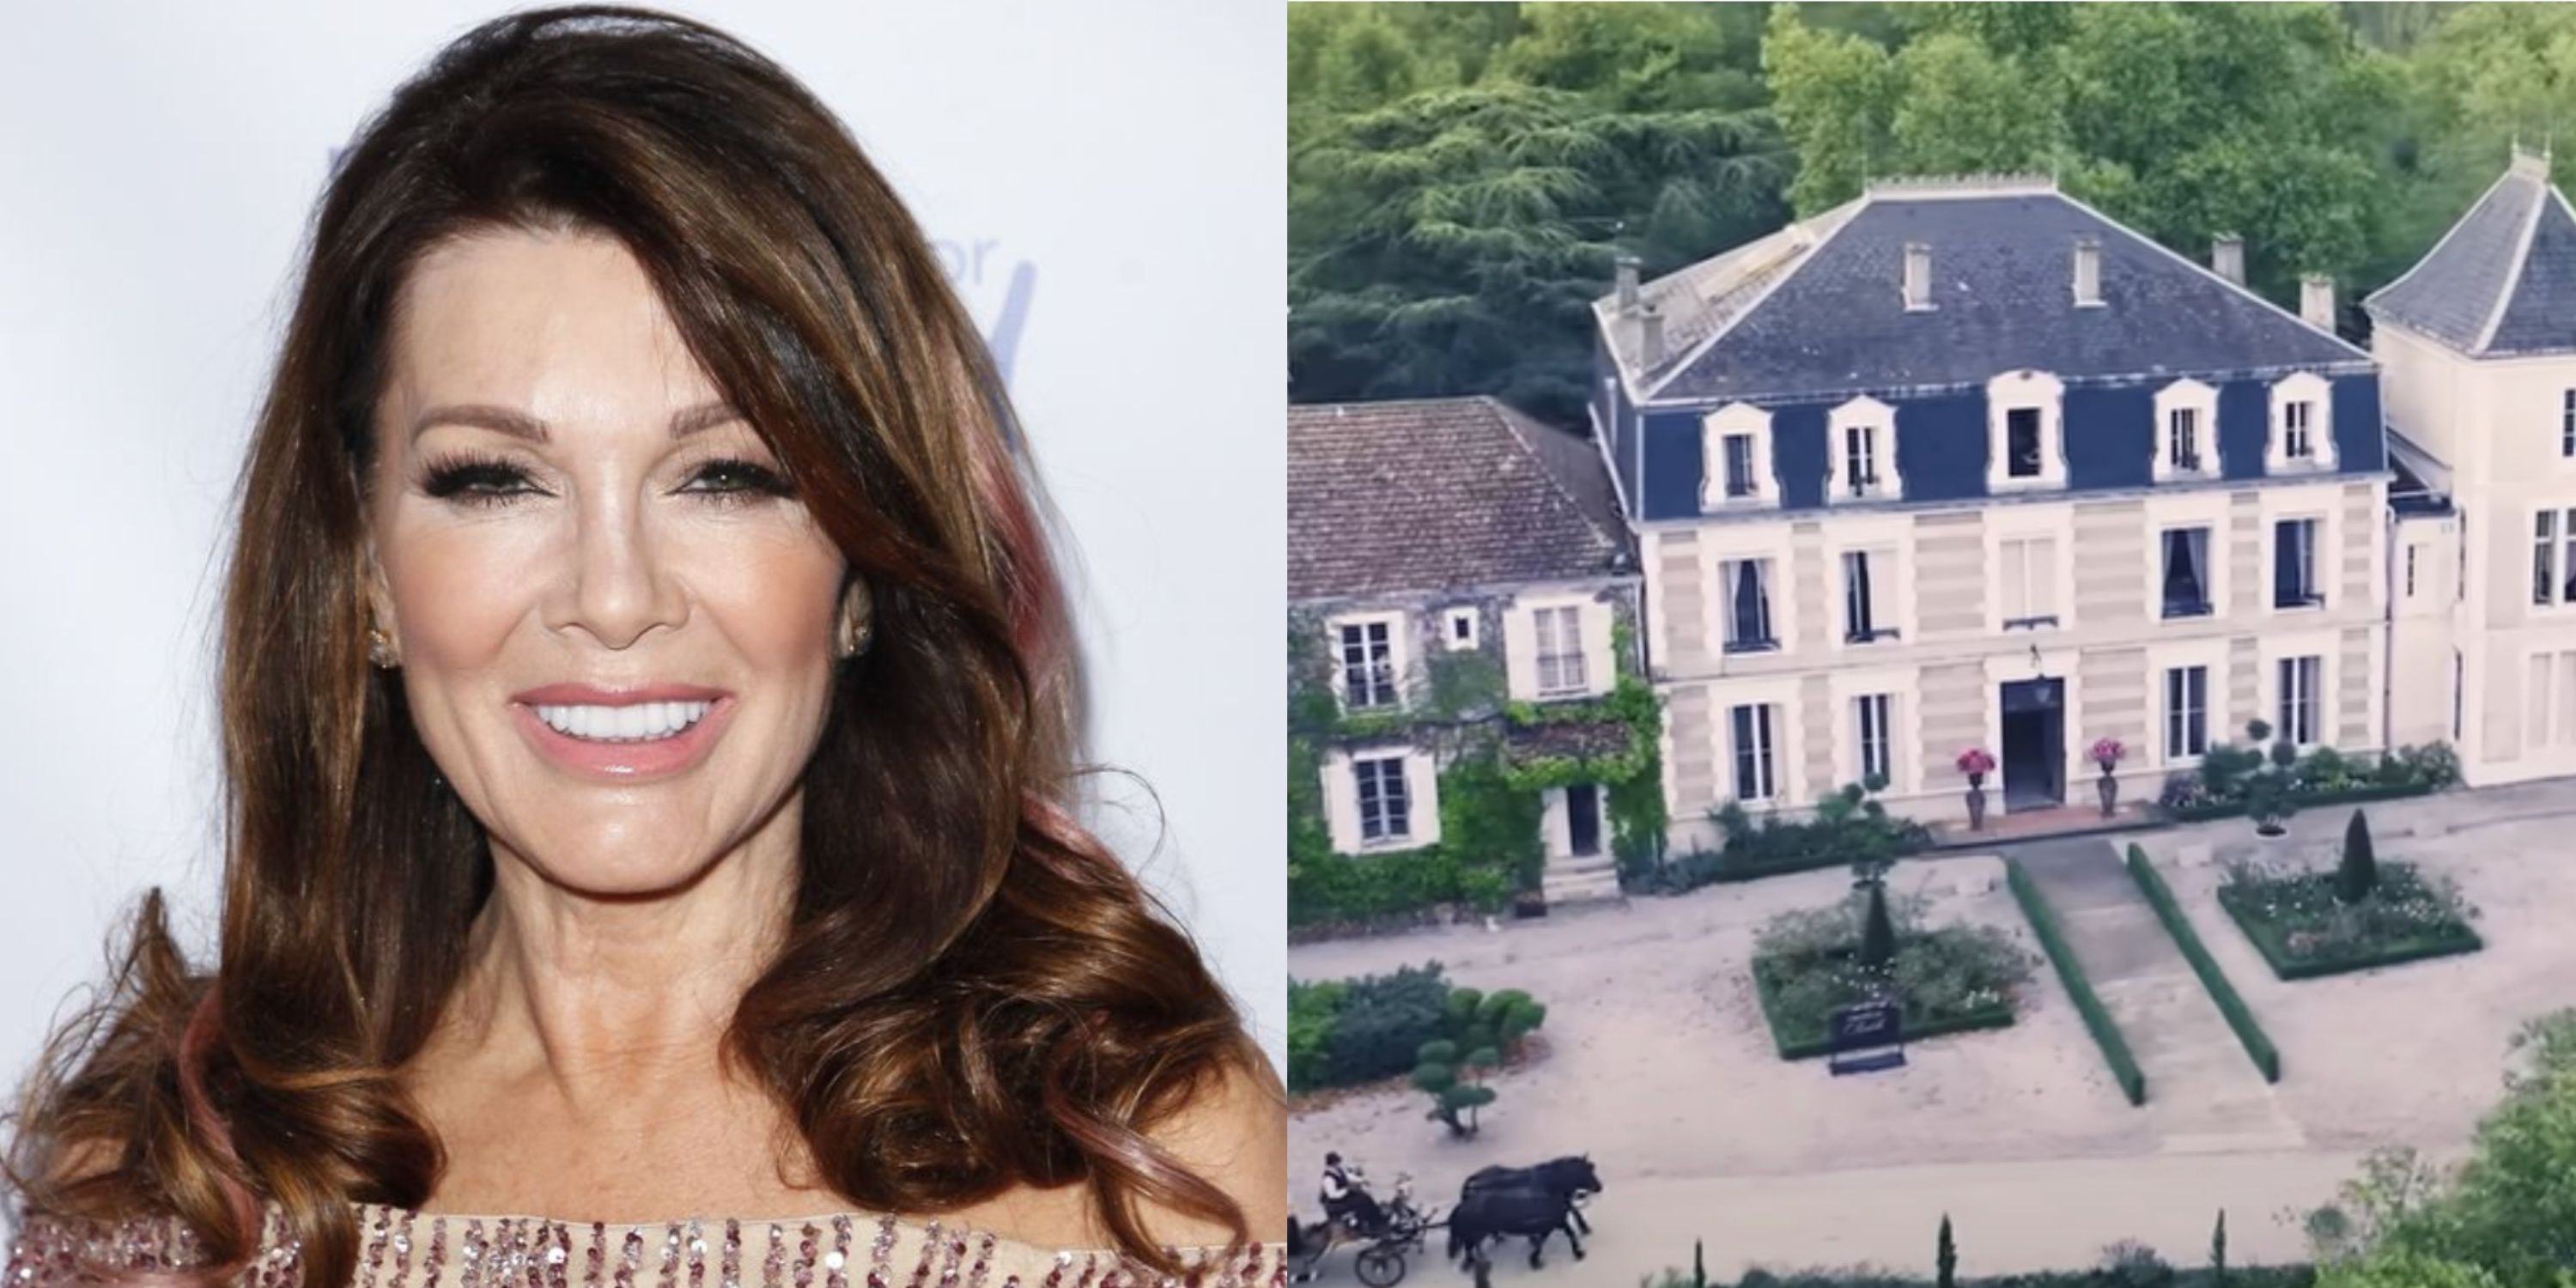 https://hips.hearstapps.com/hmg-prod/images/where-is-lisa-vanderpump-s-french-chateau-6596cef768cea.jpg